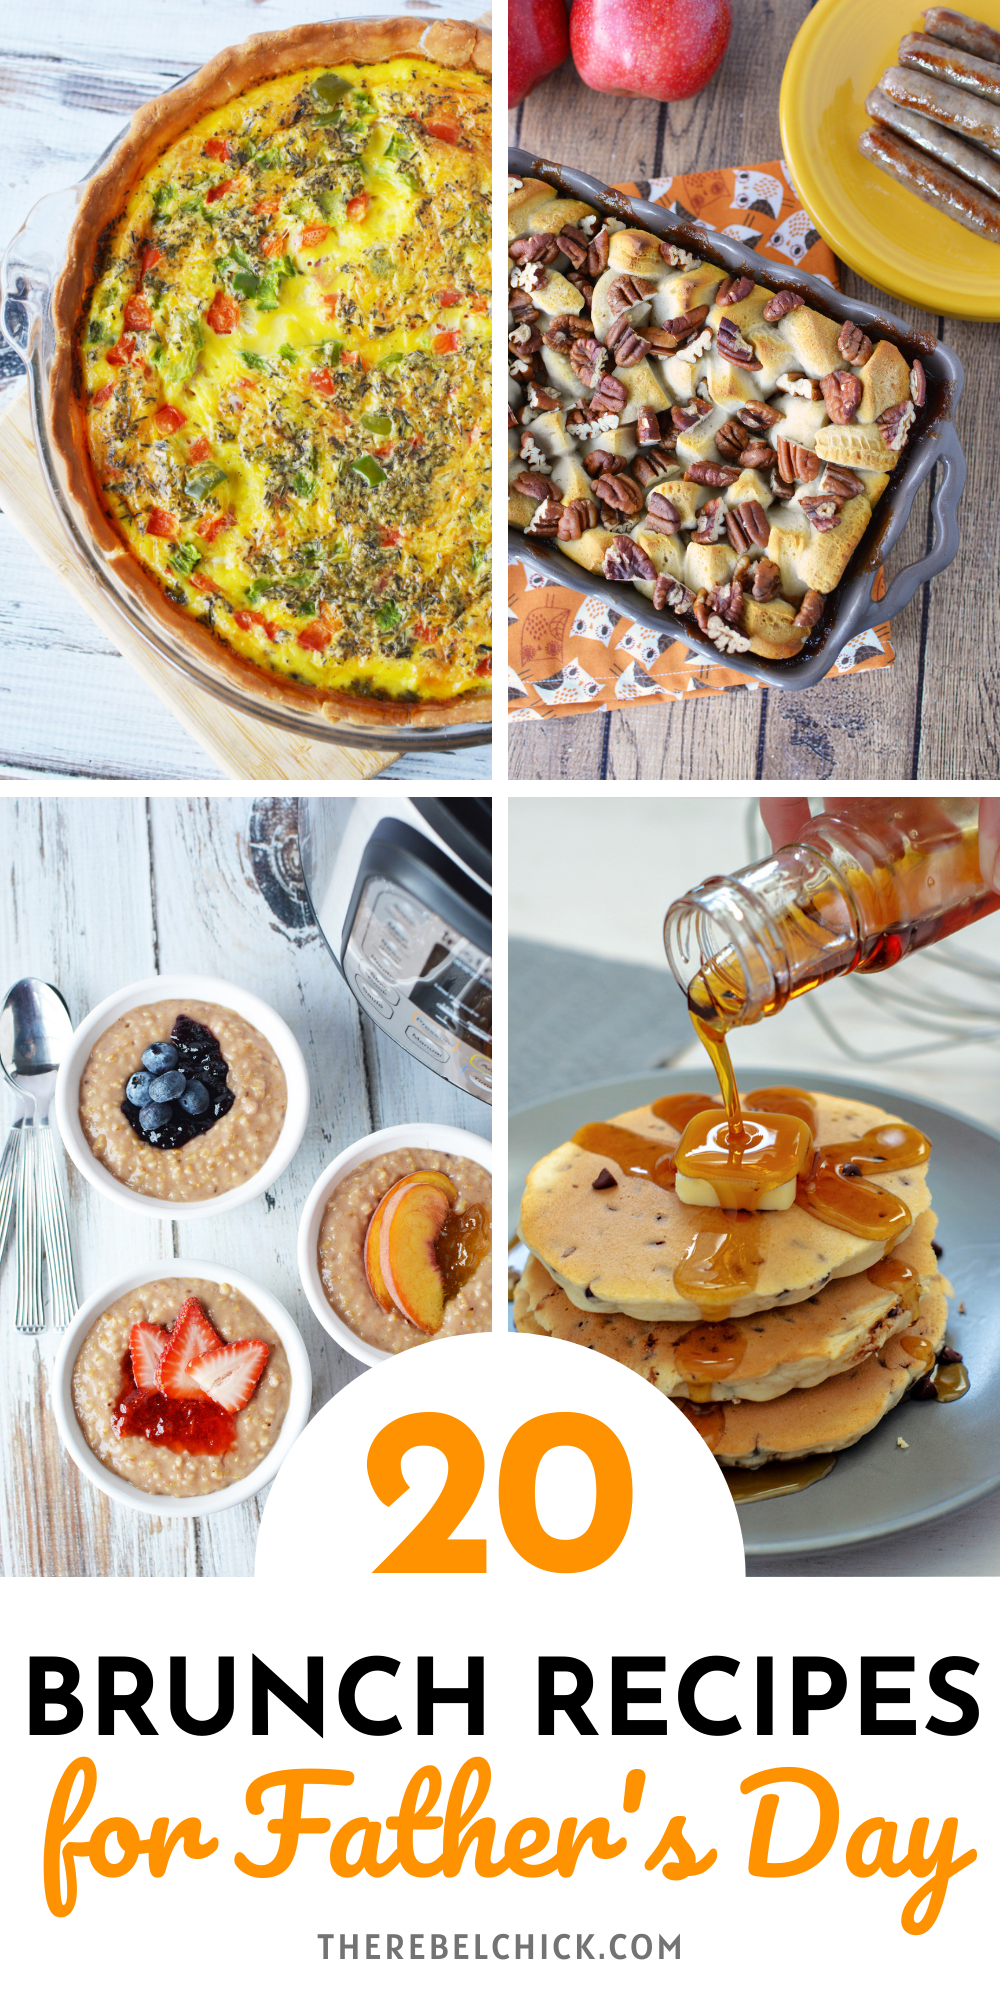 20 Brunch Recipes to Try For Father's Day